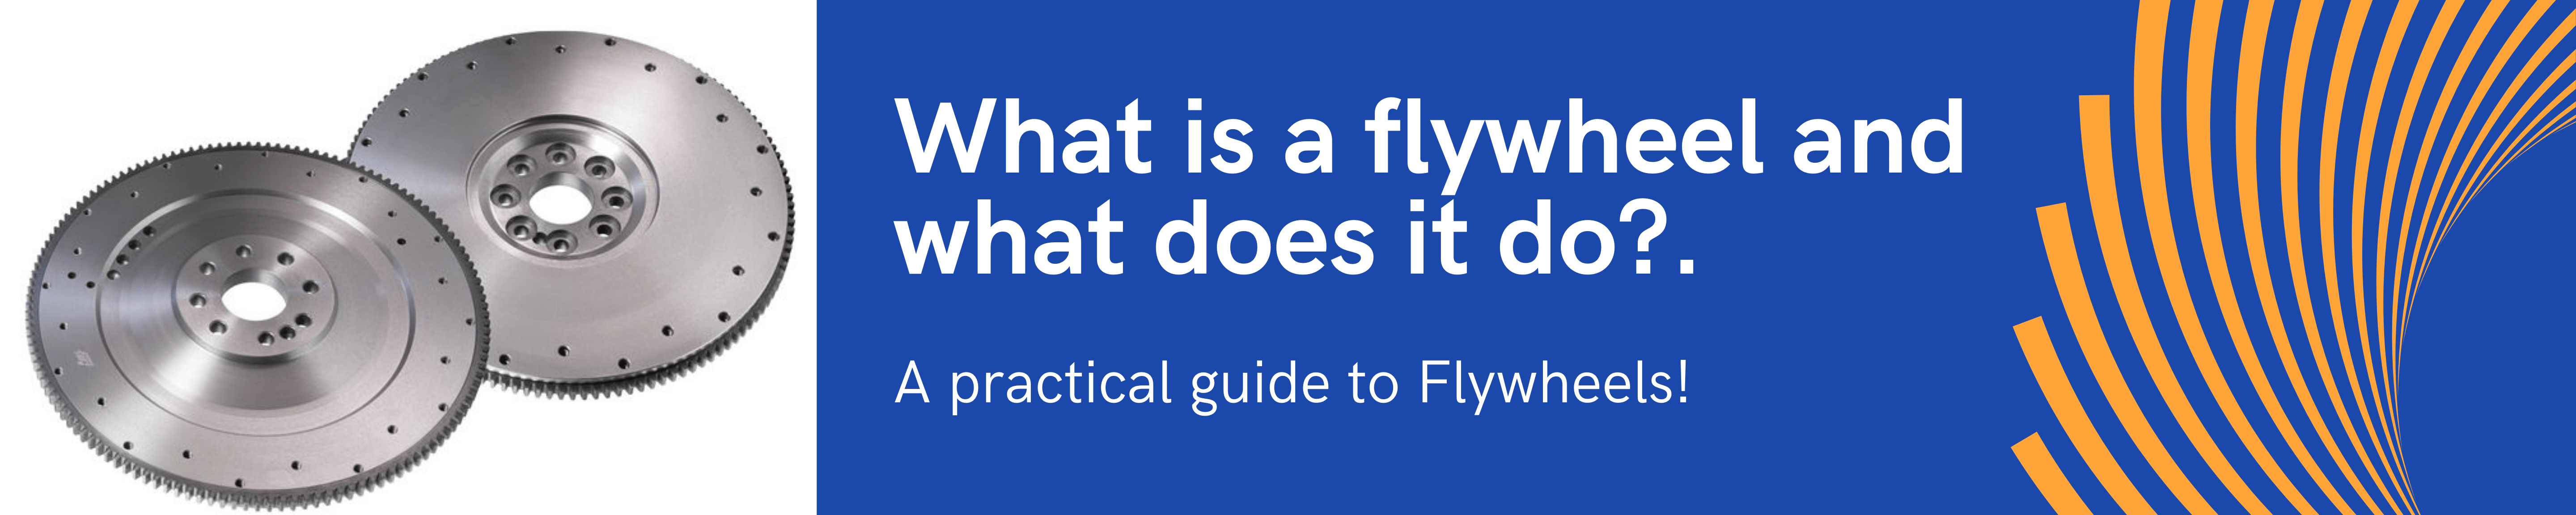 What Is A Flywheel And What Does It Do?